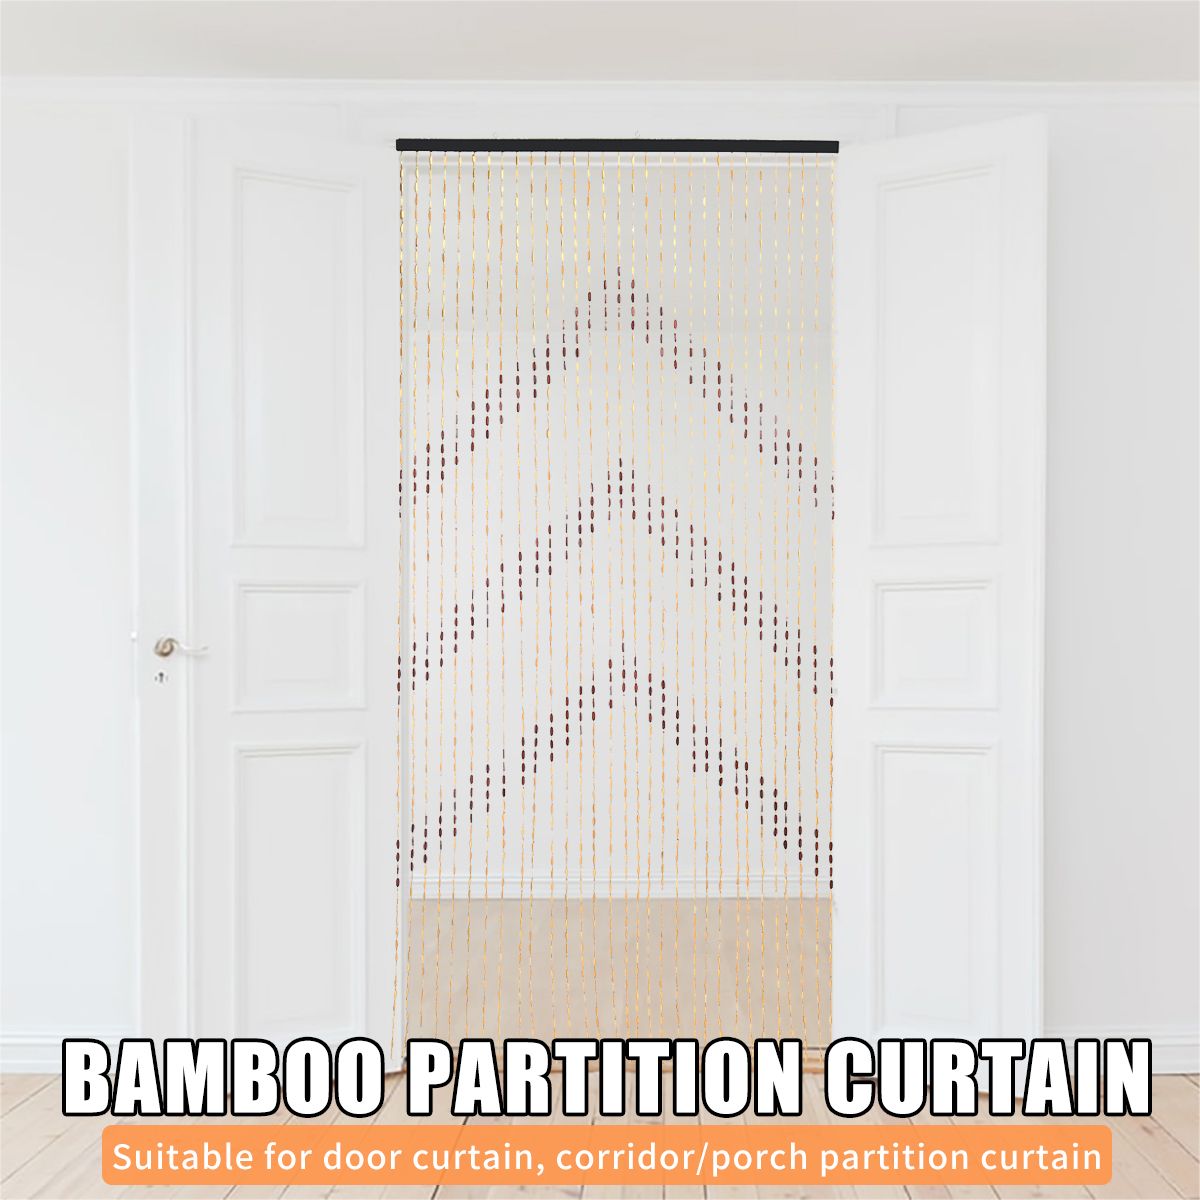 90x180cm-Bamboo-Wooden-Door-Curtains-Blinds-Fly-Bug-Screen-Decoration-Room-Divider-1622746